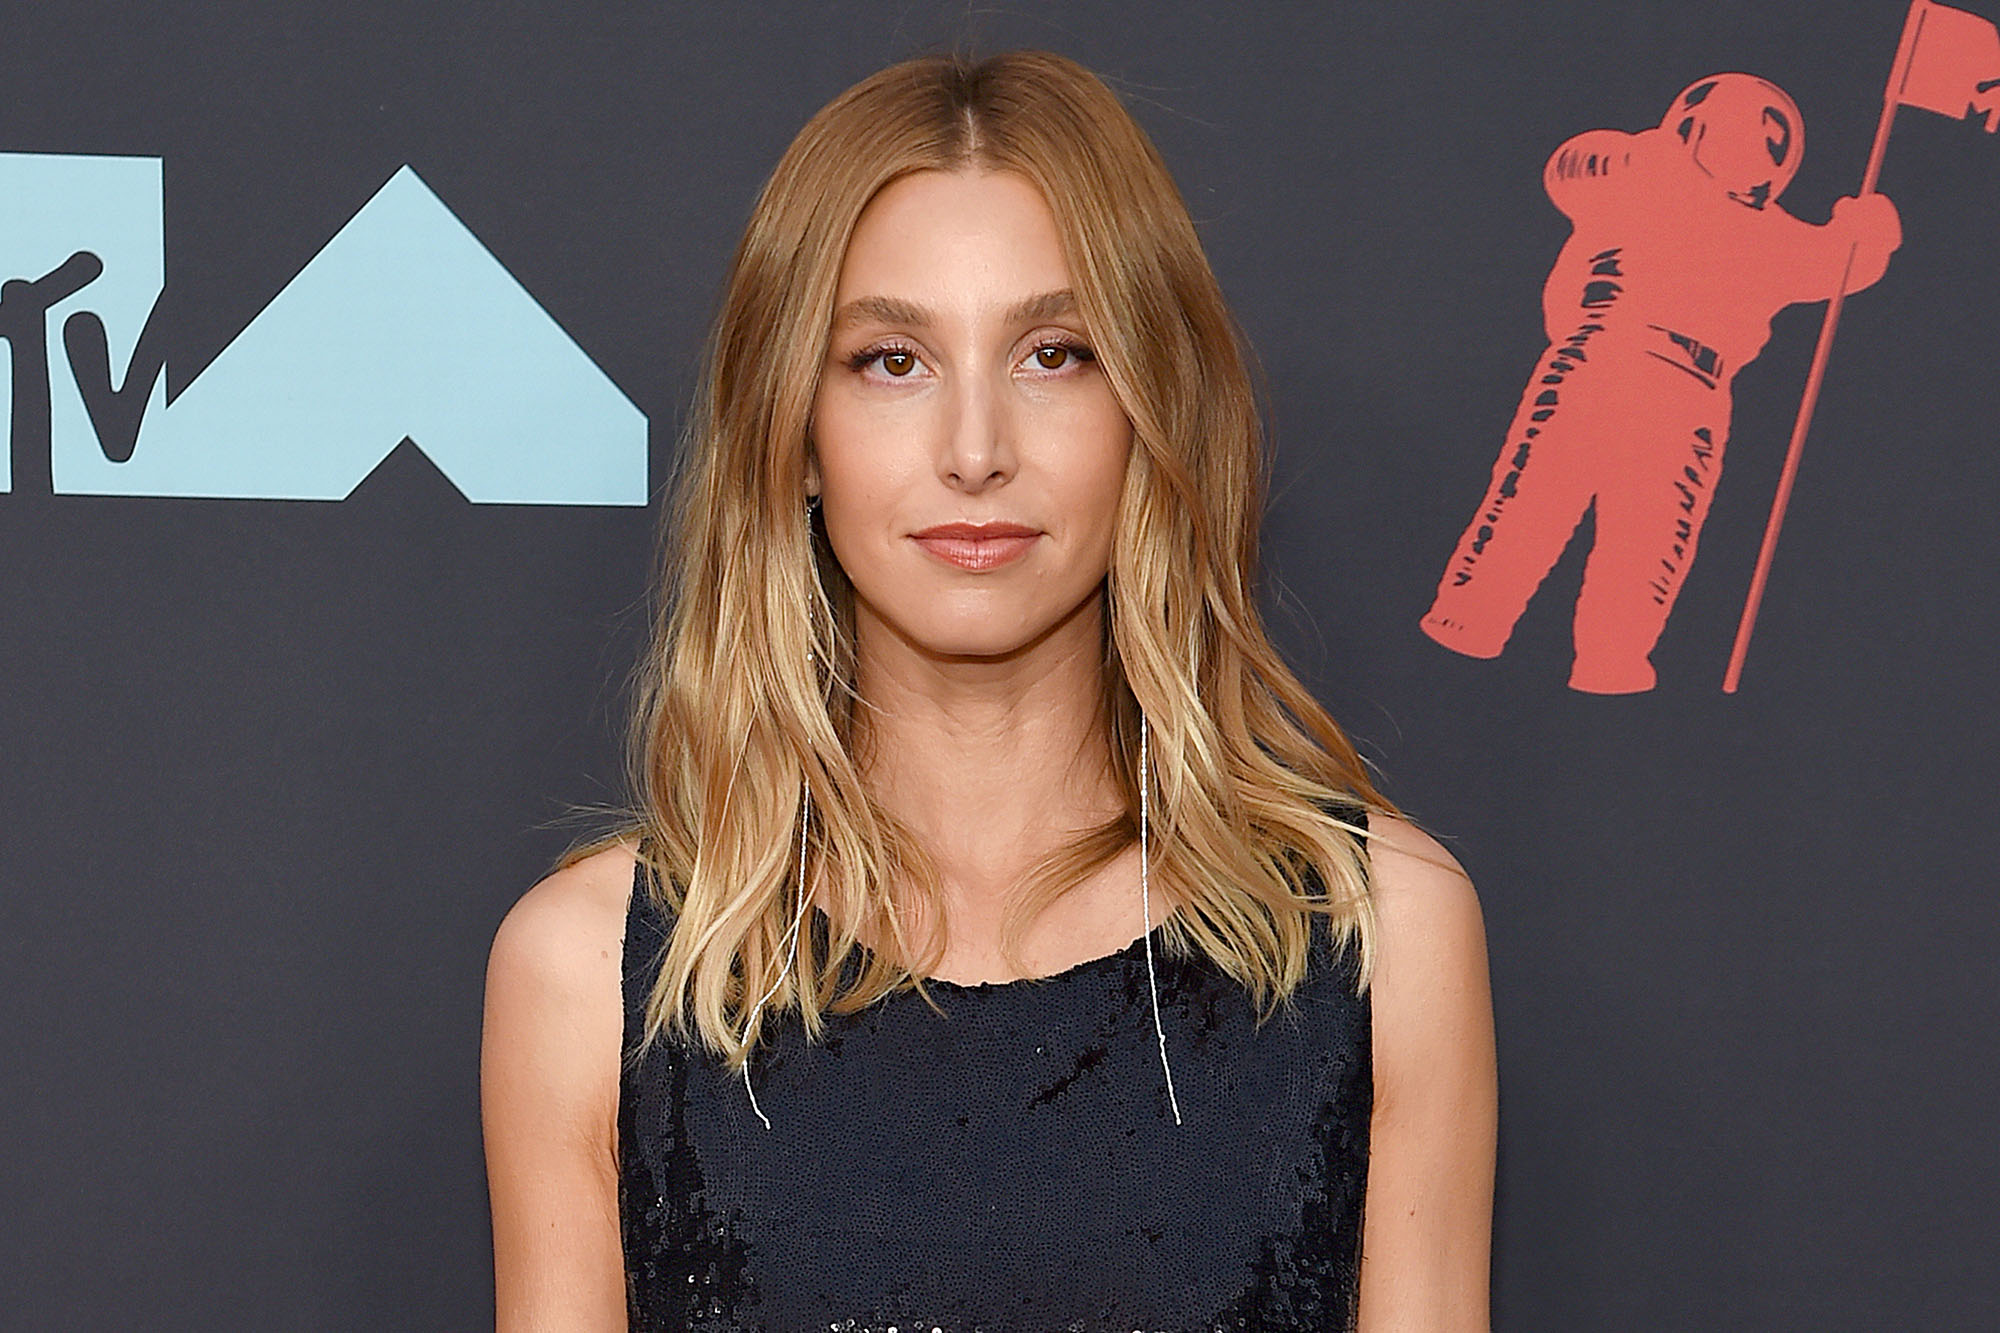 Whitney Port posing on the red carpet while wearing all black